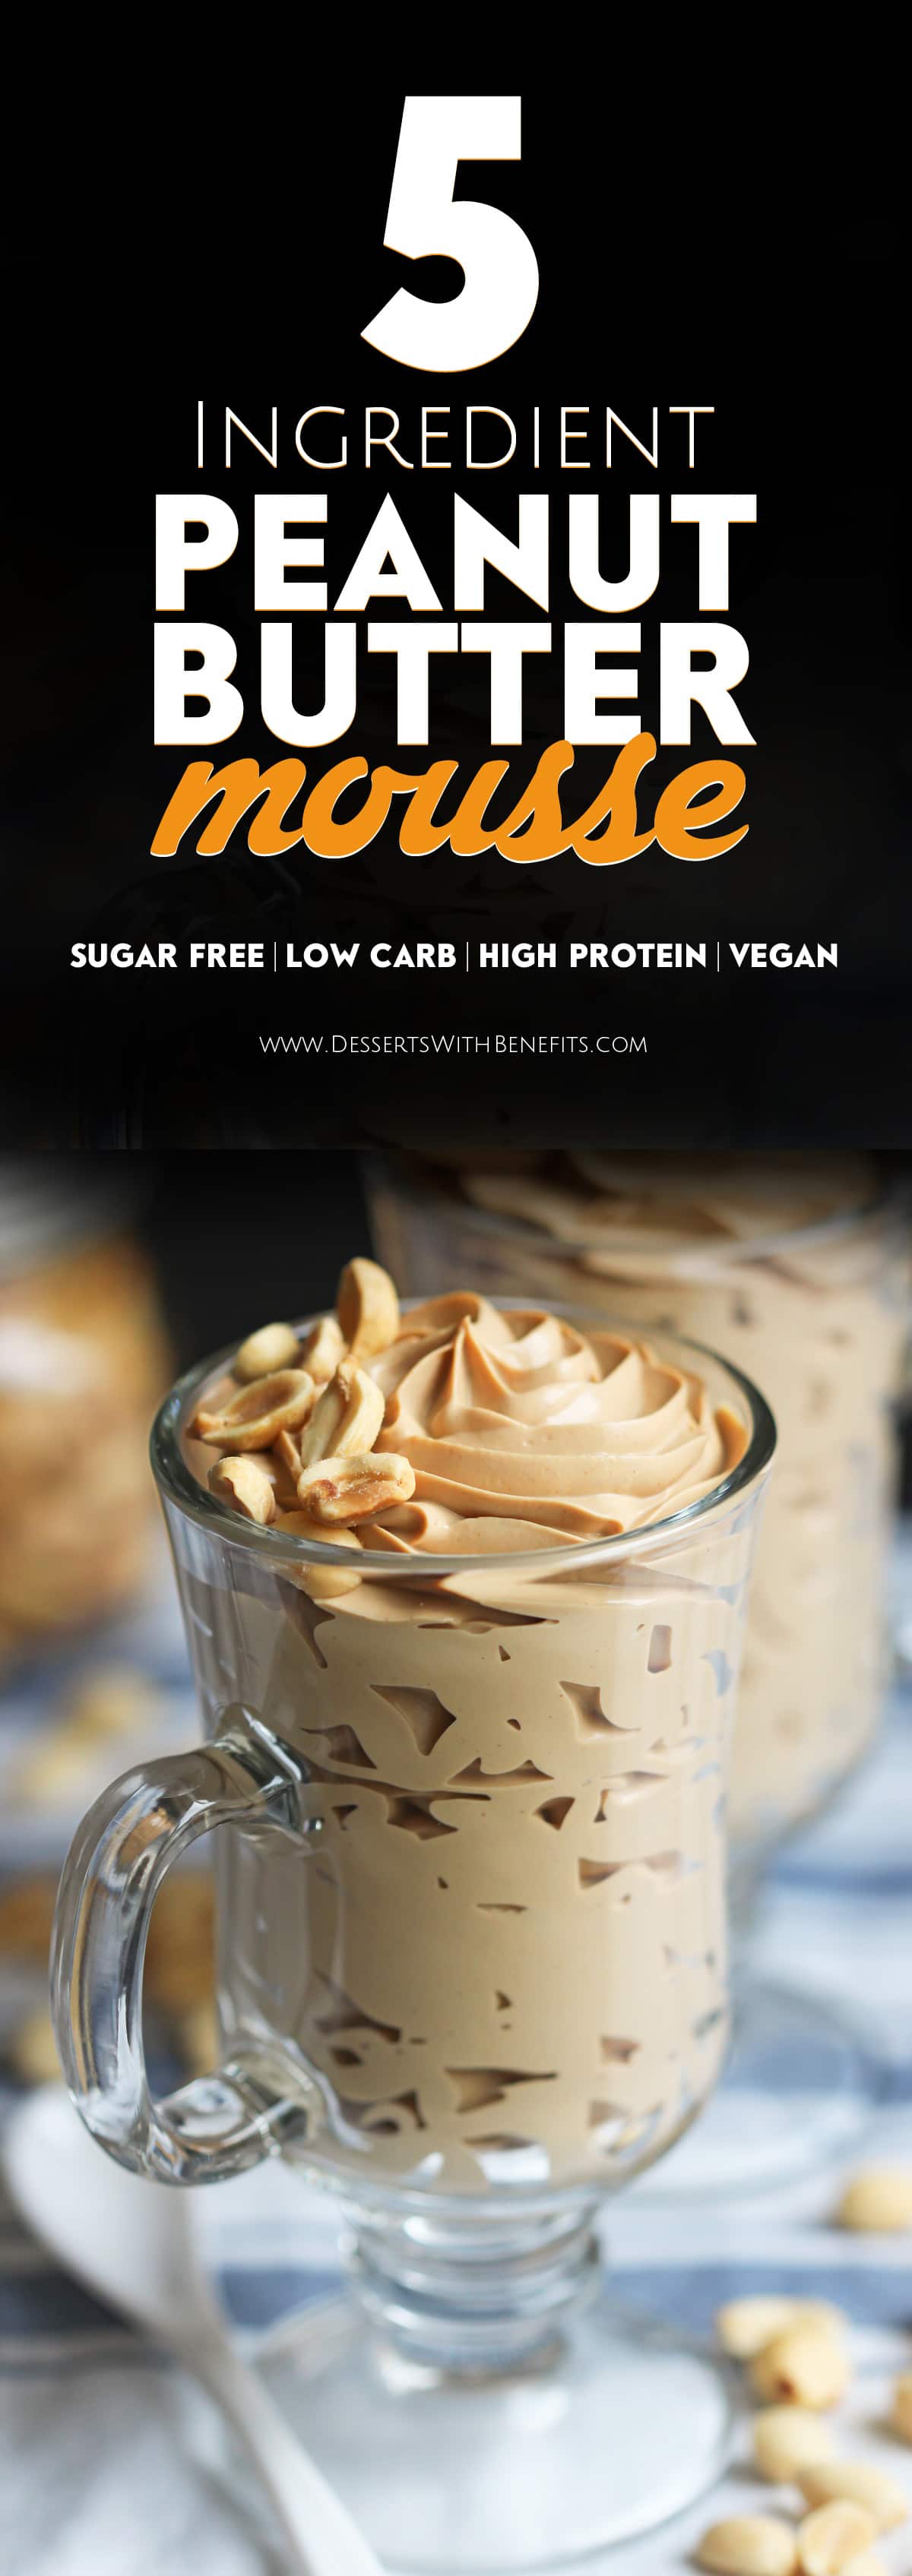 This rich and decadent Healthy Peanut Butter Mousse recipe is secretly guilt free, sugar free, low carb, high protein, gluten free, dairy free, AND vegan! -- Healthy Dessert Recipes at Desserts with Benefits